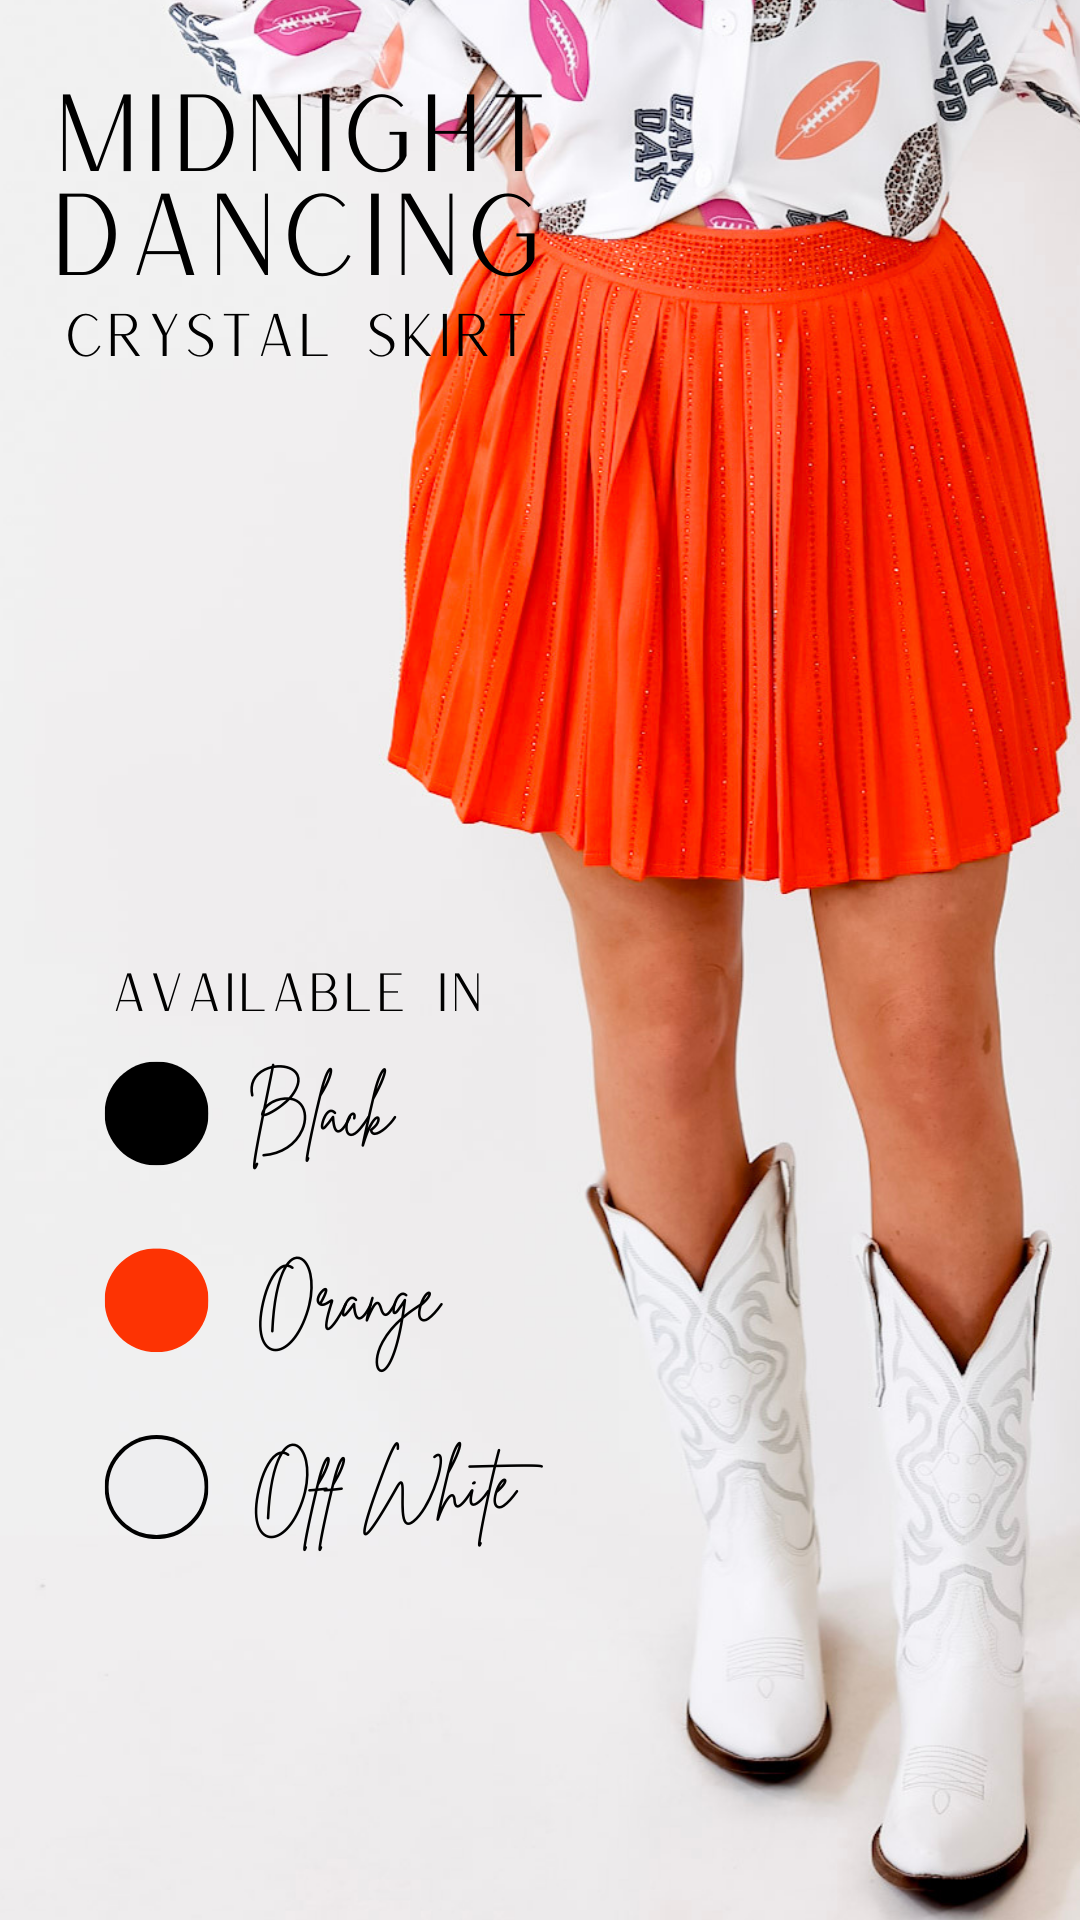 Midnight Dancing Crystal Skirt in Orange - Giddy Up Glamour Boutique